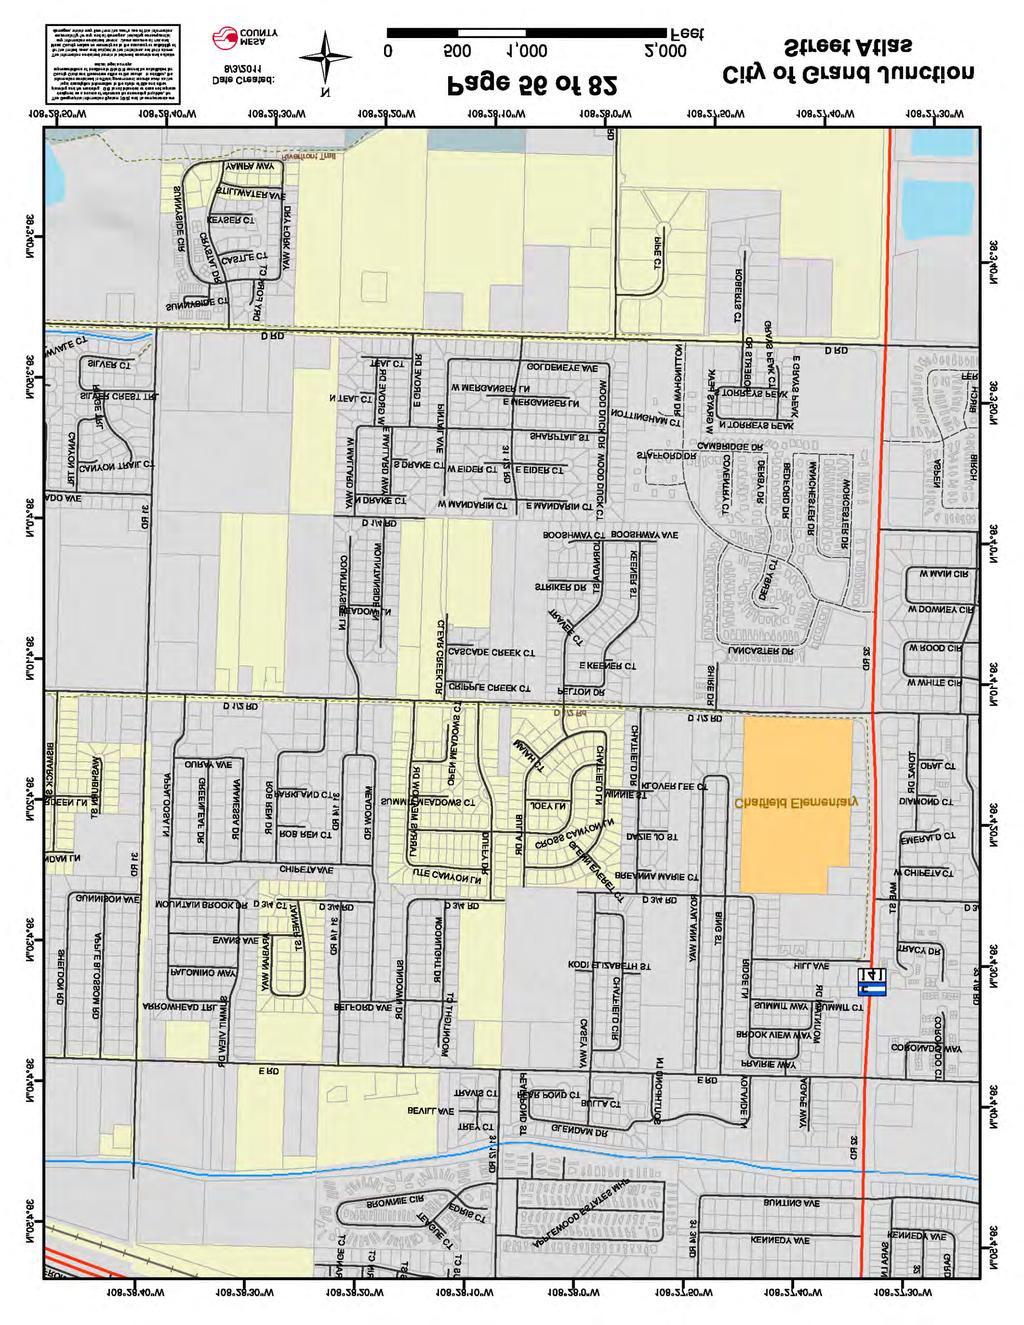 300.01' Year 1 LOCATION MAP D 1/2 ROAD LAND USE SUMMARY AREA PERCENT USE (sf) OF TOTAL Buildings 45,810 48.2 Office 290 0.3 Drives 28,470 30.0 Existing & Proposed Buffers 12,168 12.